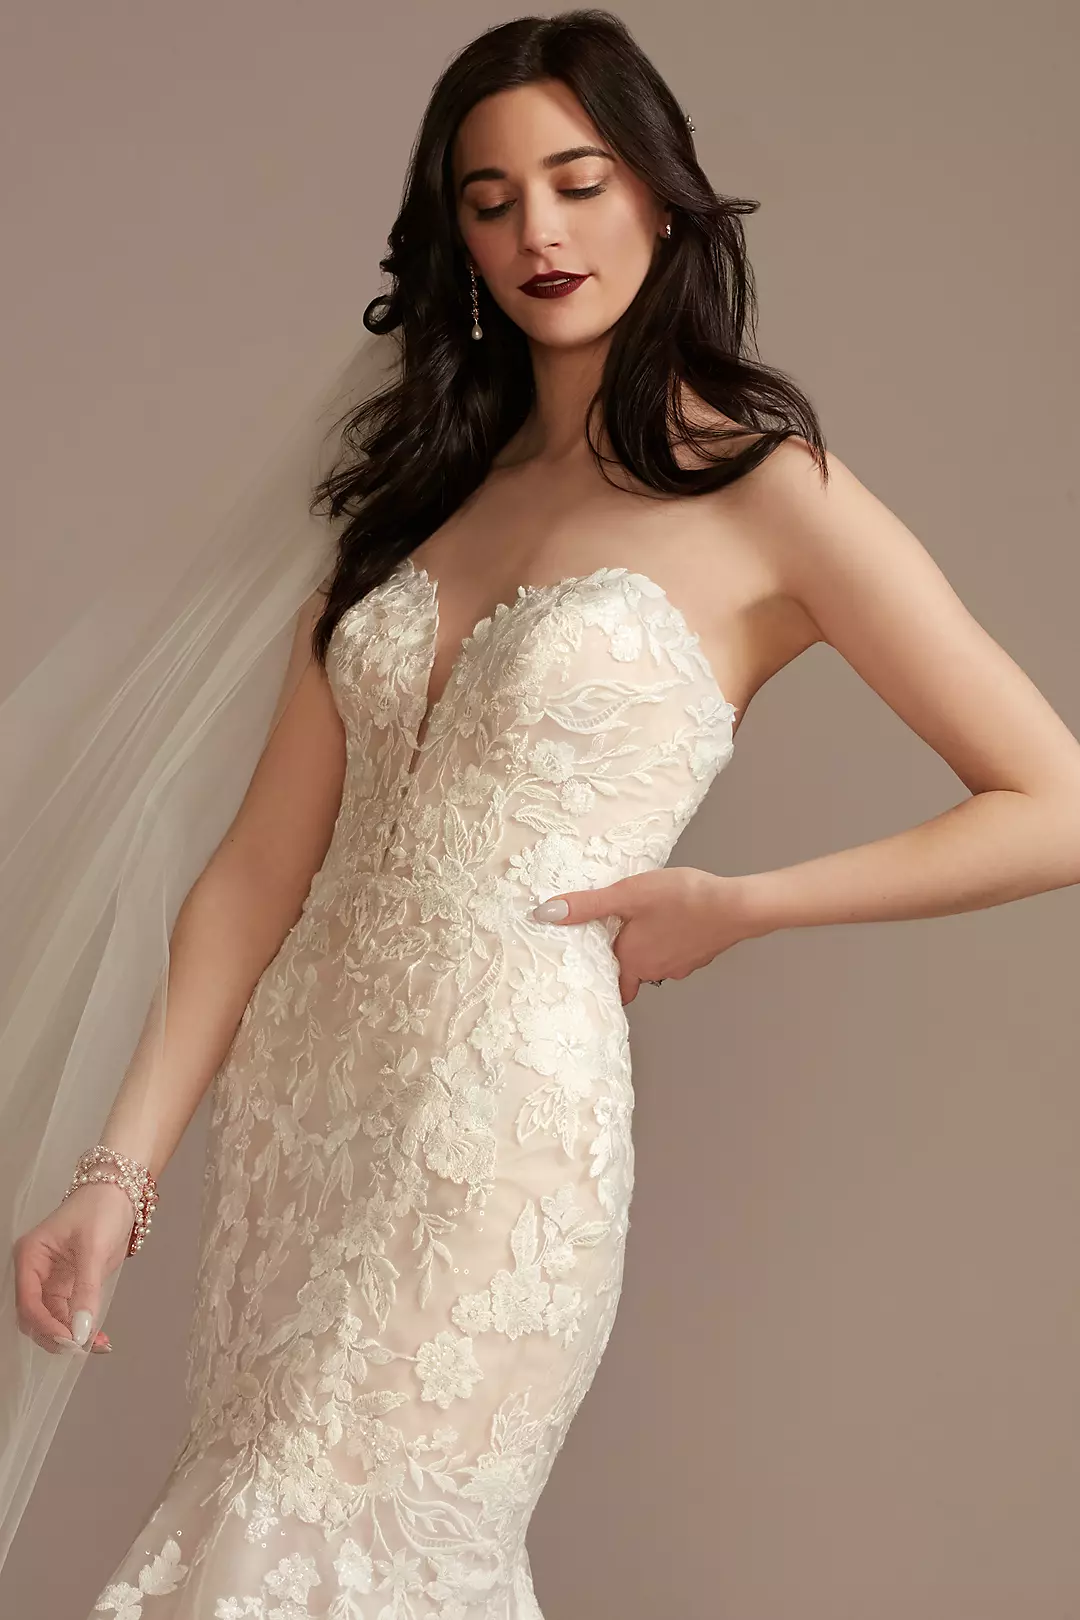 TALIA / Mermaid Wedding Dress with Strapless Bodice - LaceMarry